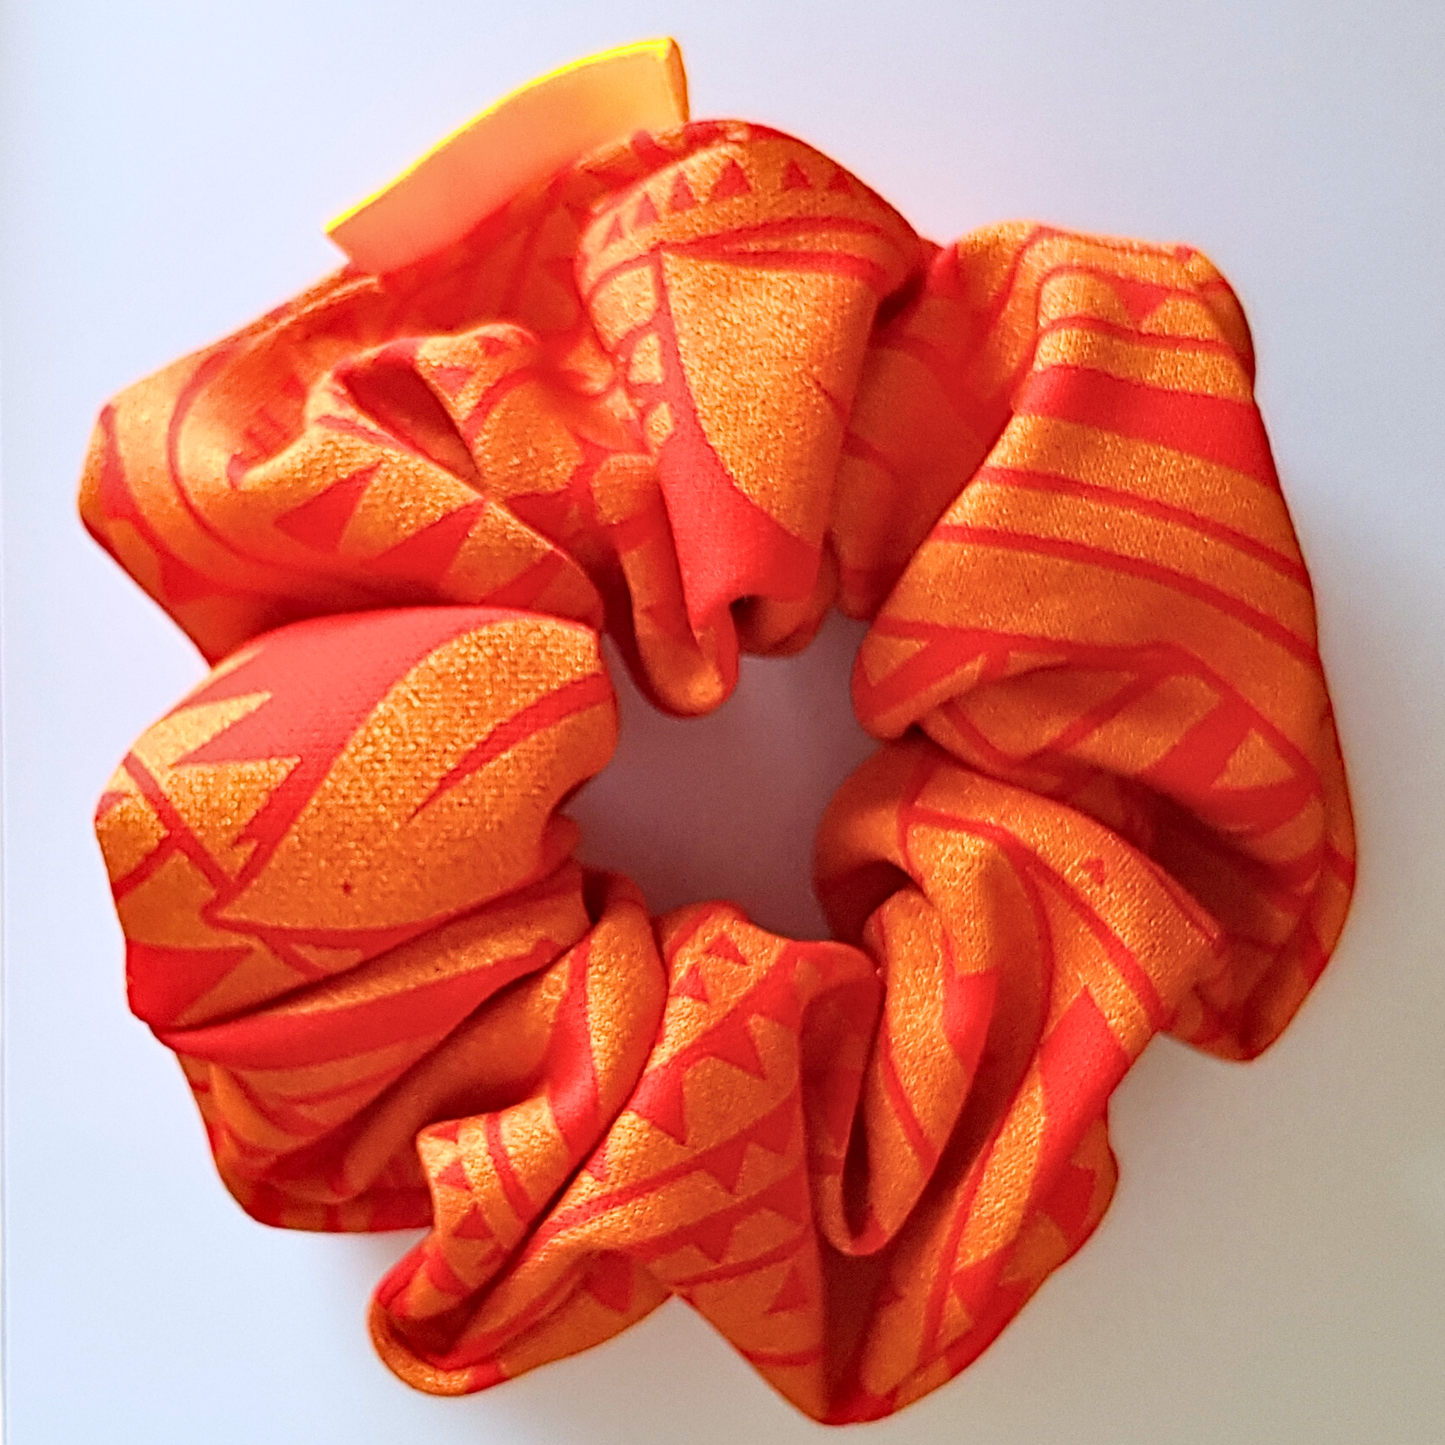 Pasifika hair scrunchies. made from cotton. pacific island pattered fabric. sizes available small, medium, large and extra large. this style is red orange